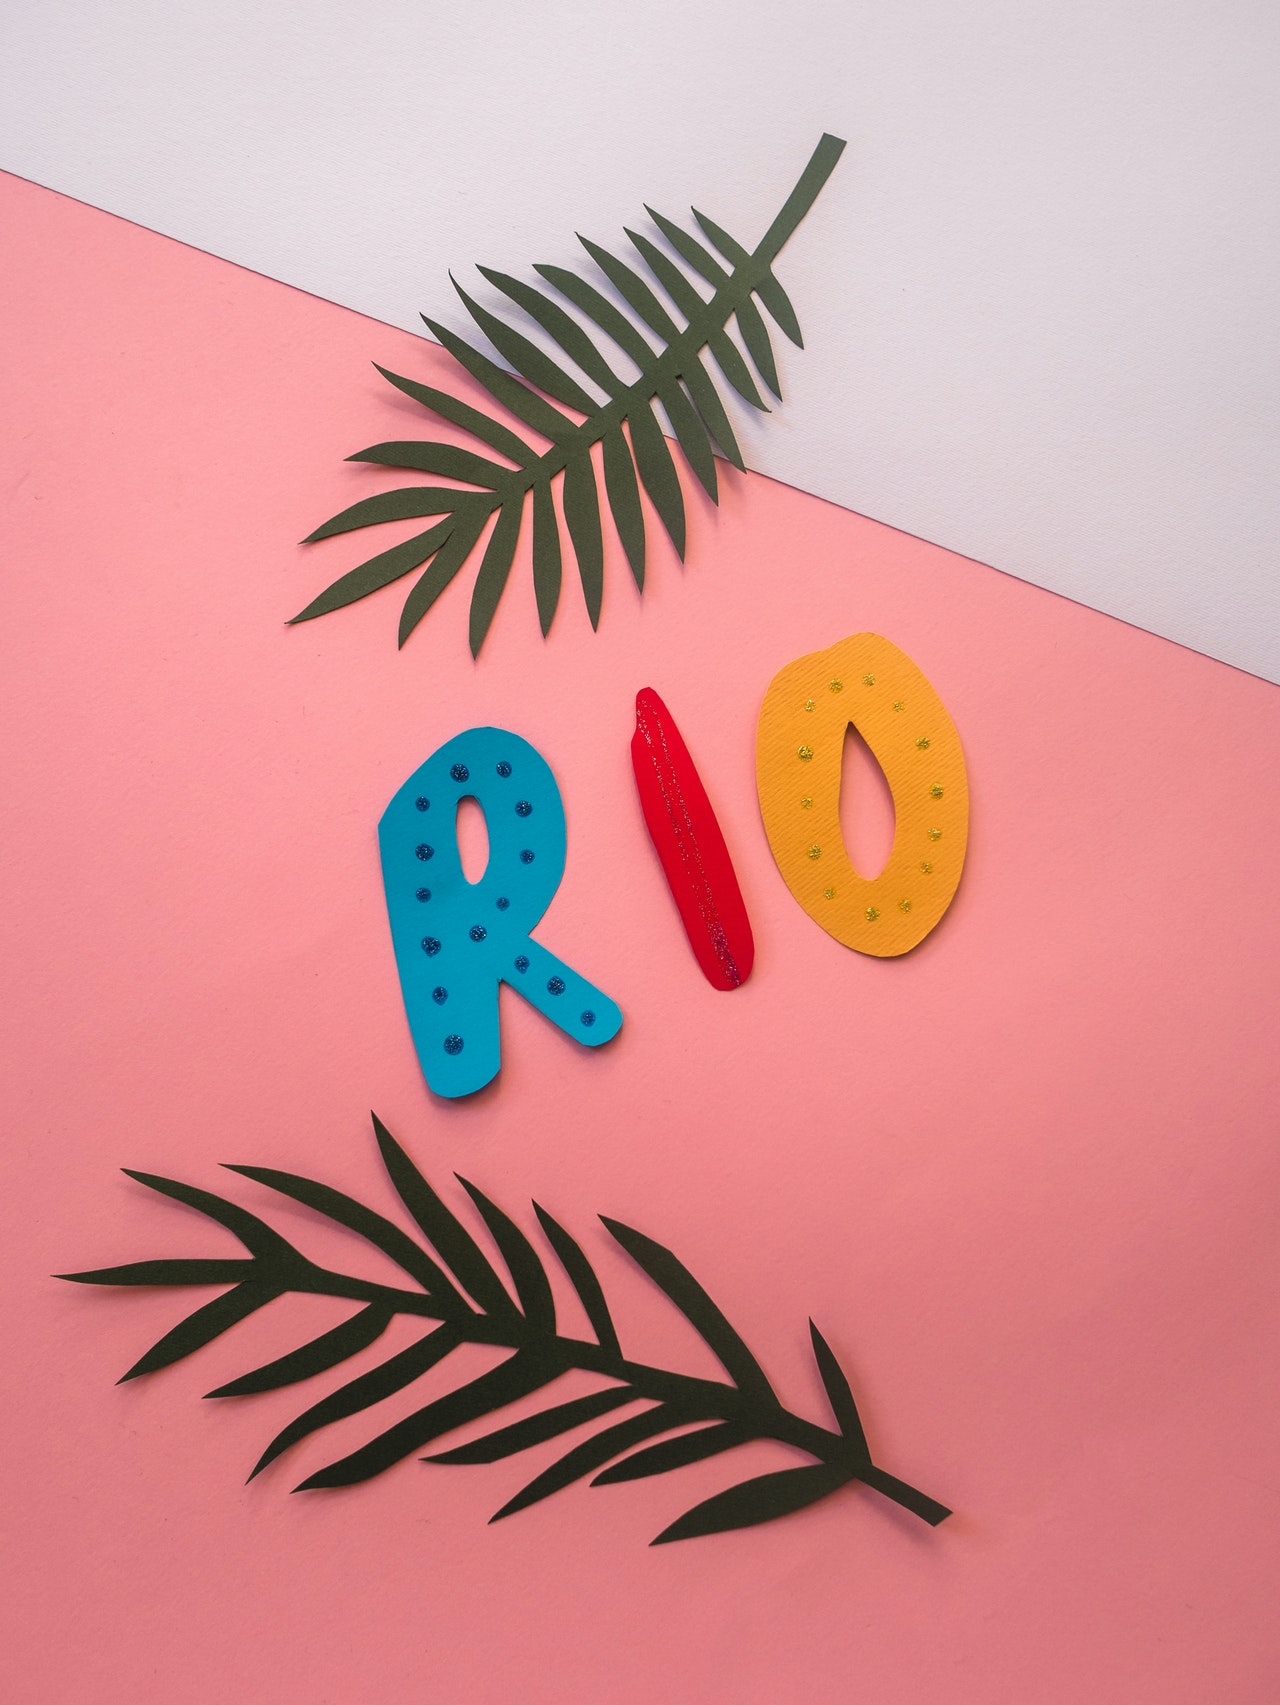 Paper cut out with Rio